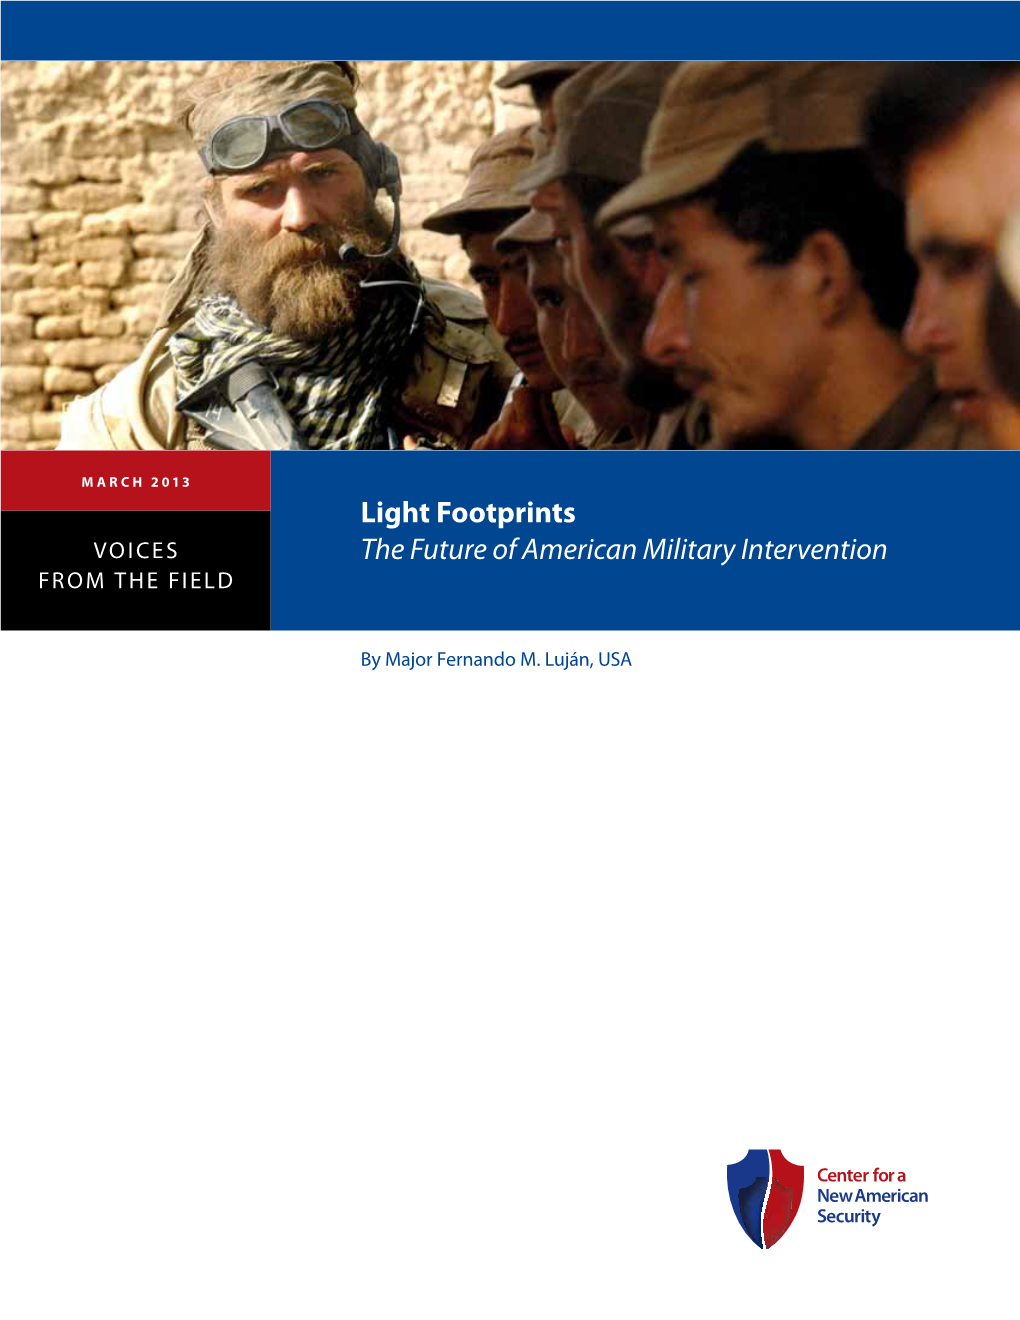 Light Footprints the Future of American Military Intervention